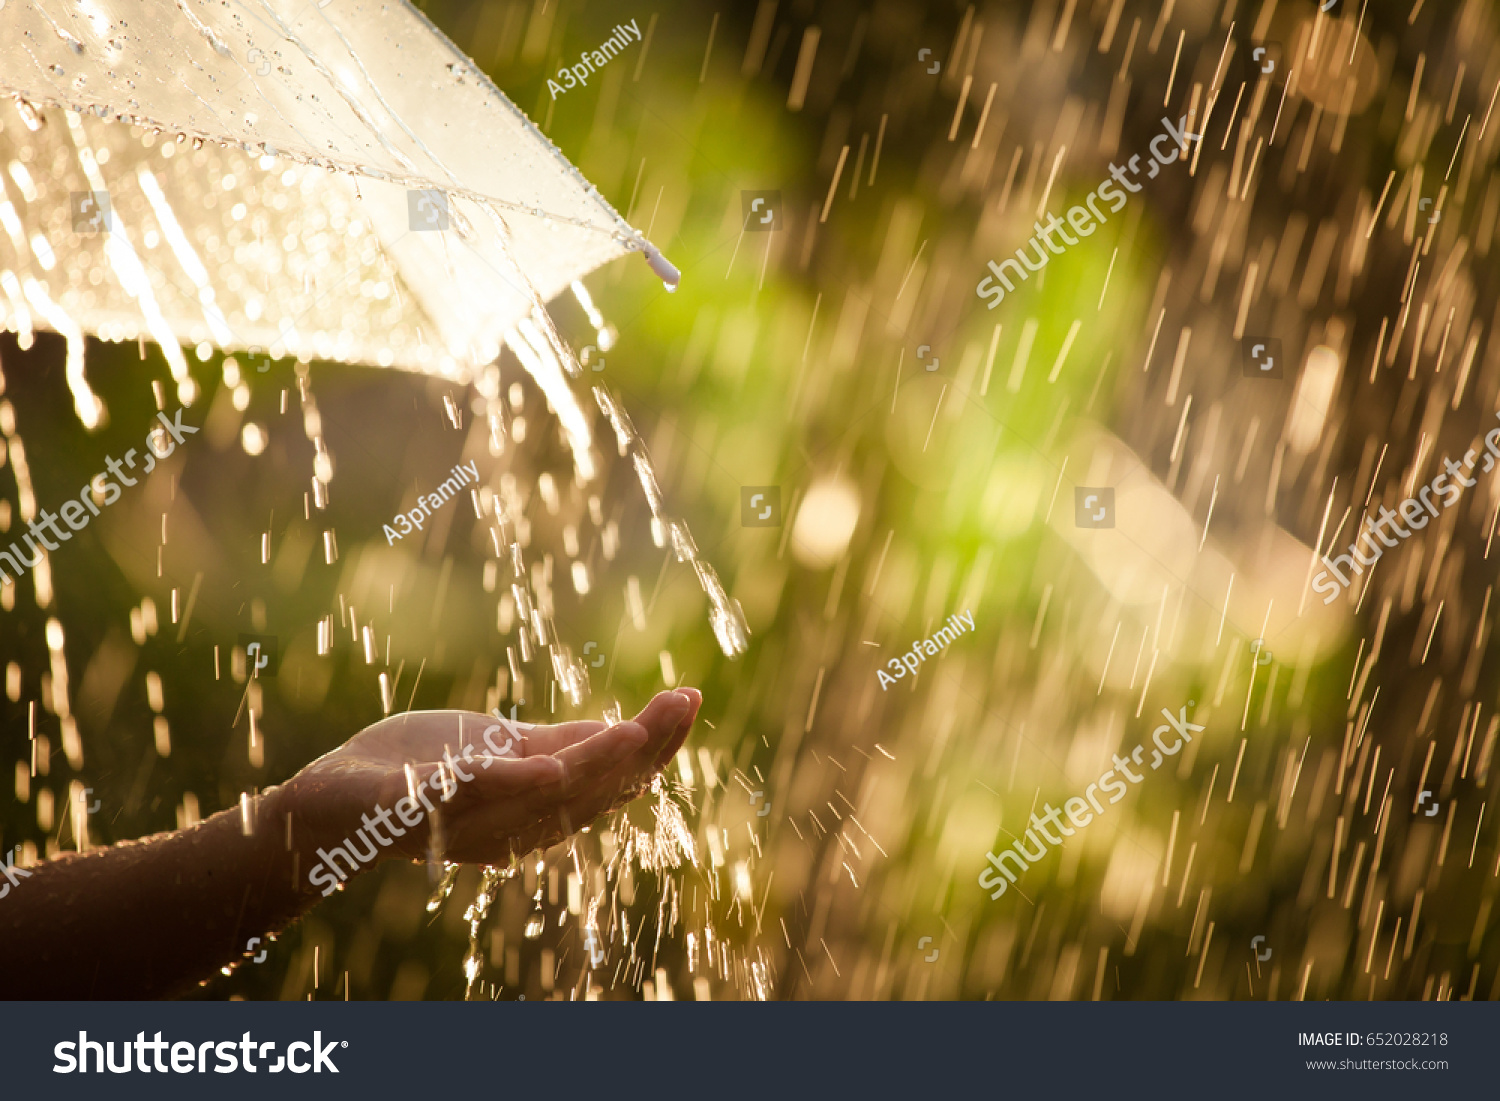 Woman hand with umbrella in the rain in green nature background #652028218